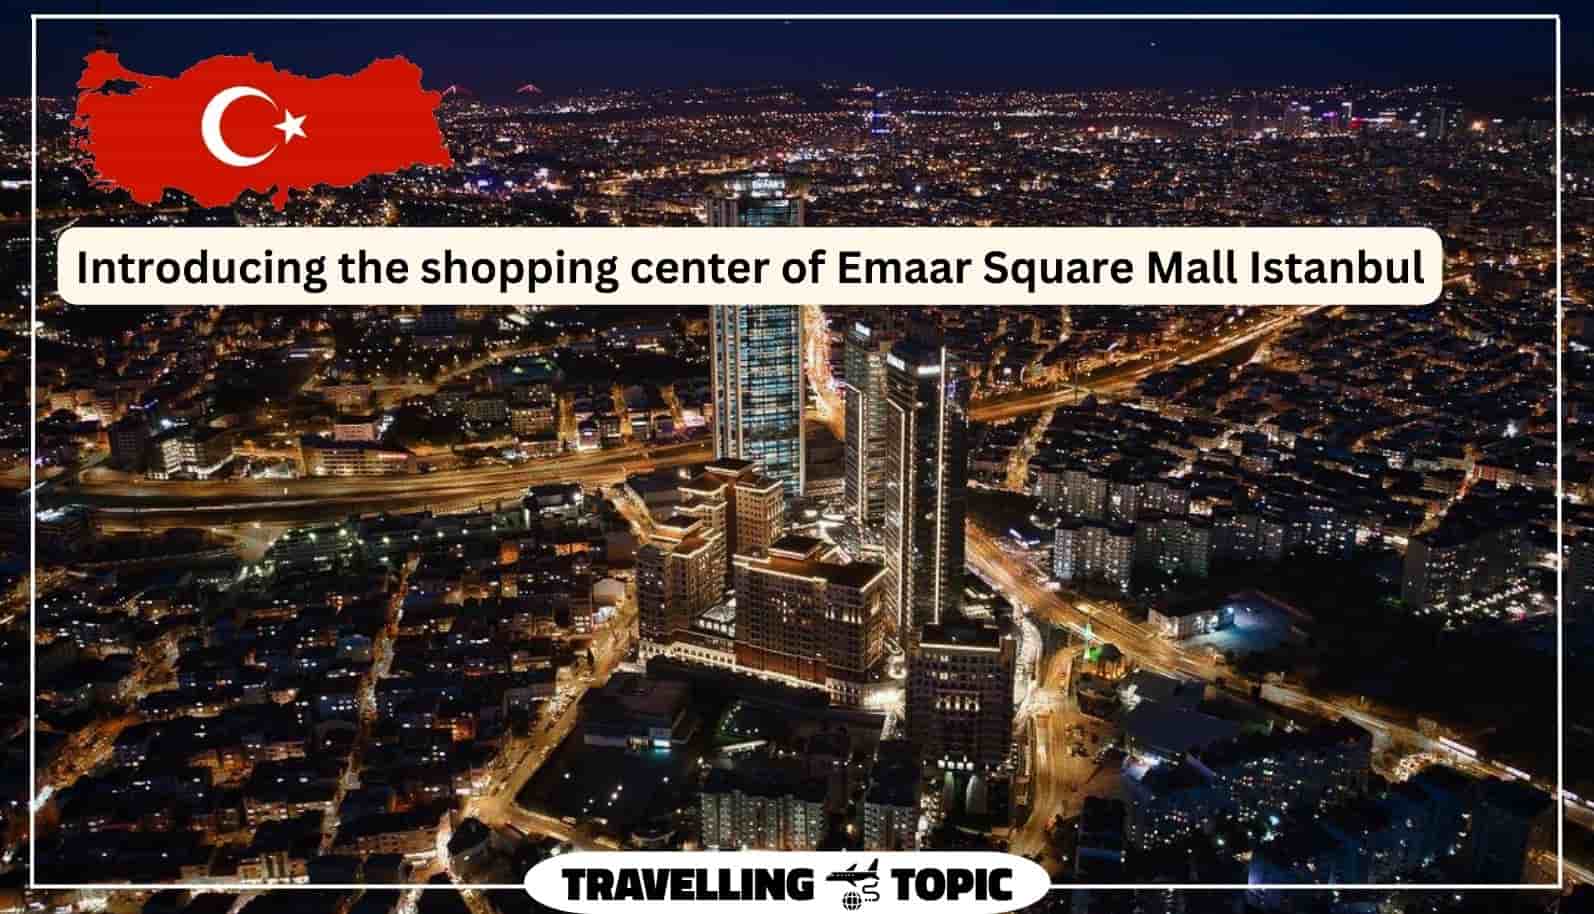 Introducing the shopping center of Emaar Square Mall Istanbul